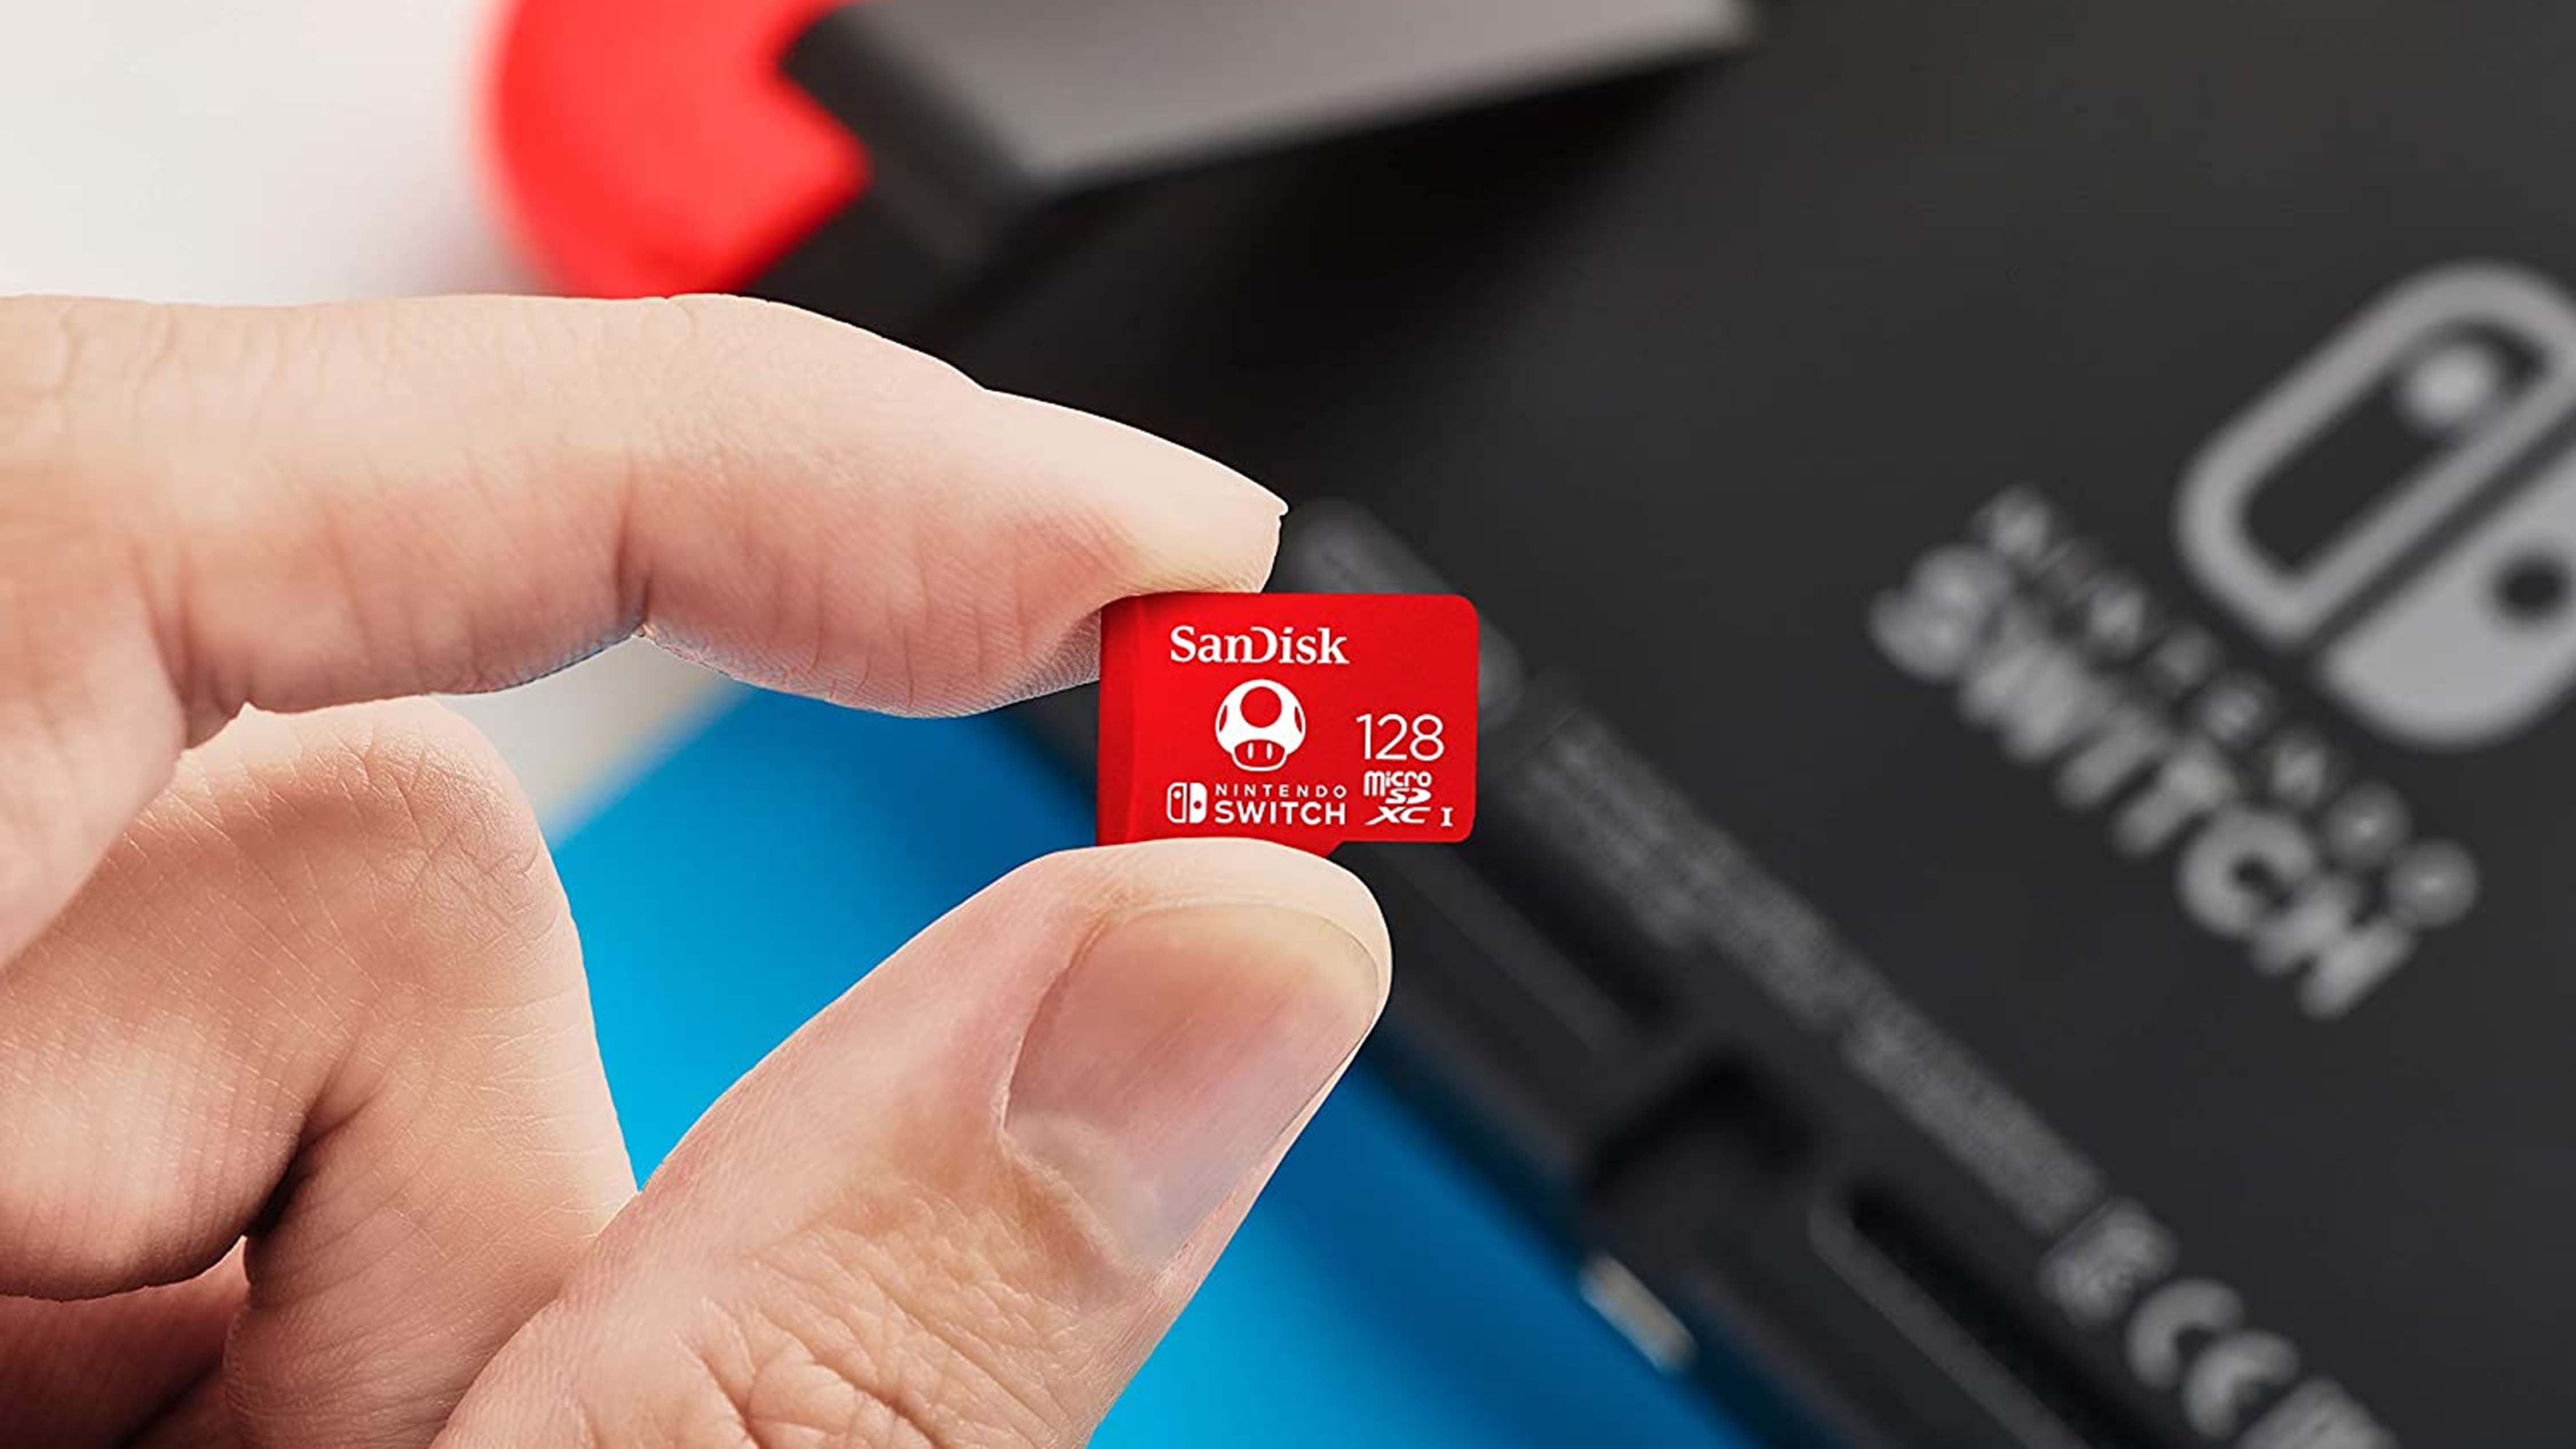 A Full Guide to MicroSD Cards on the Nintendo Switch